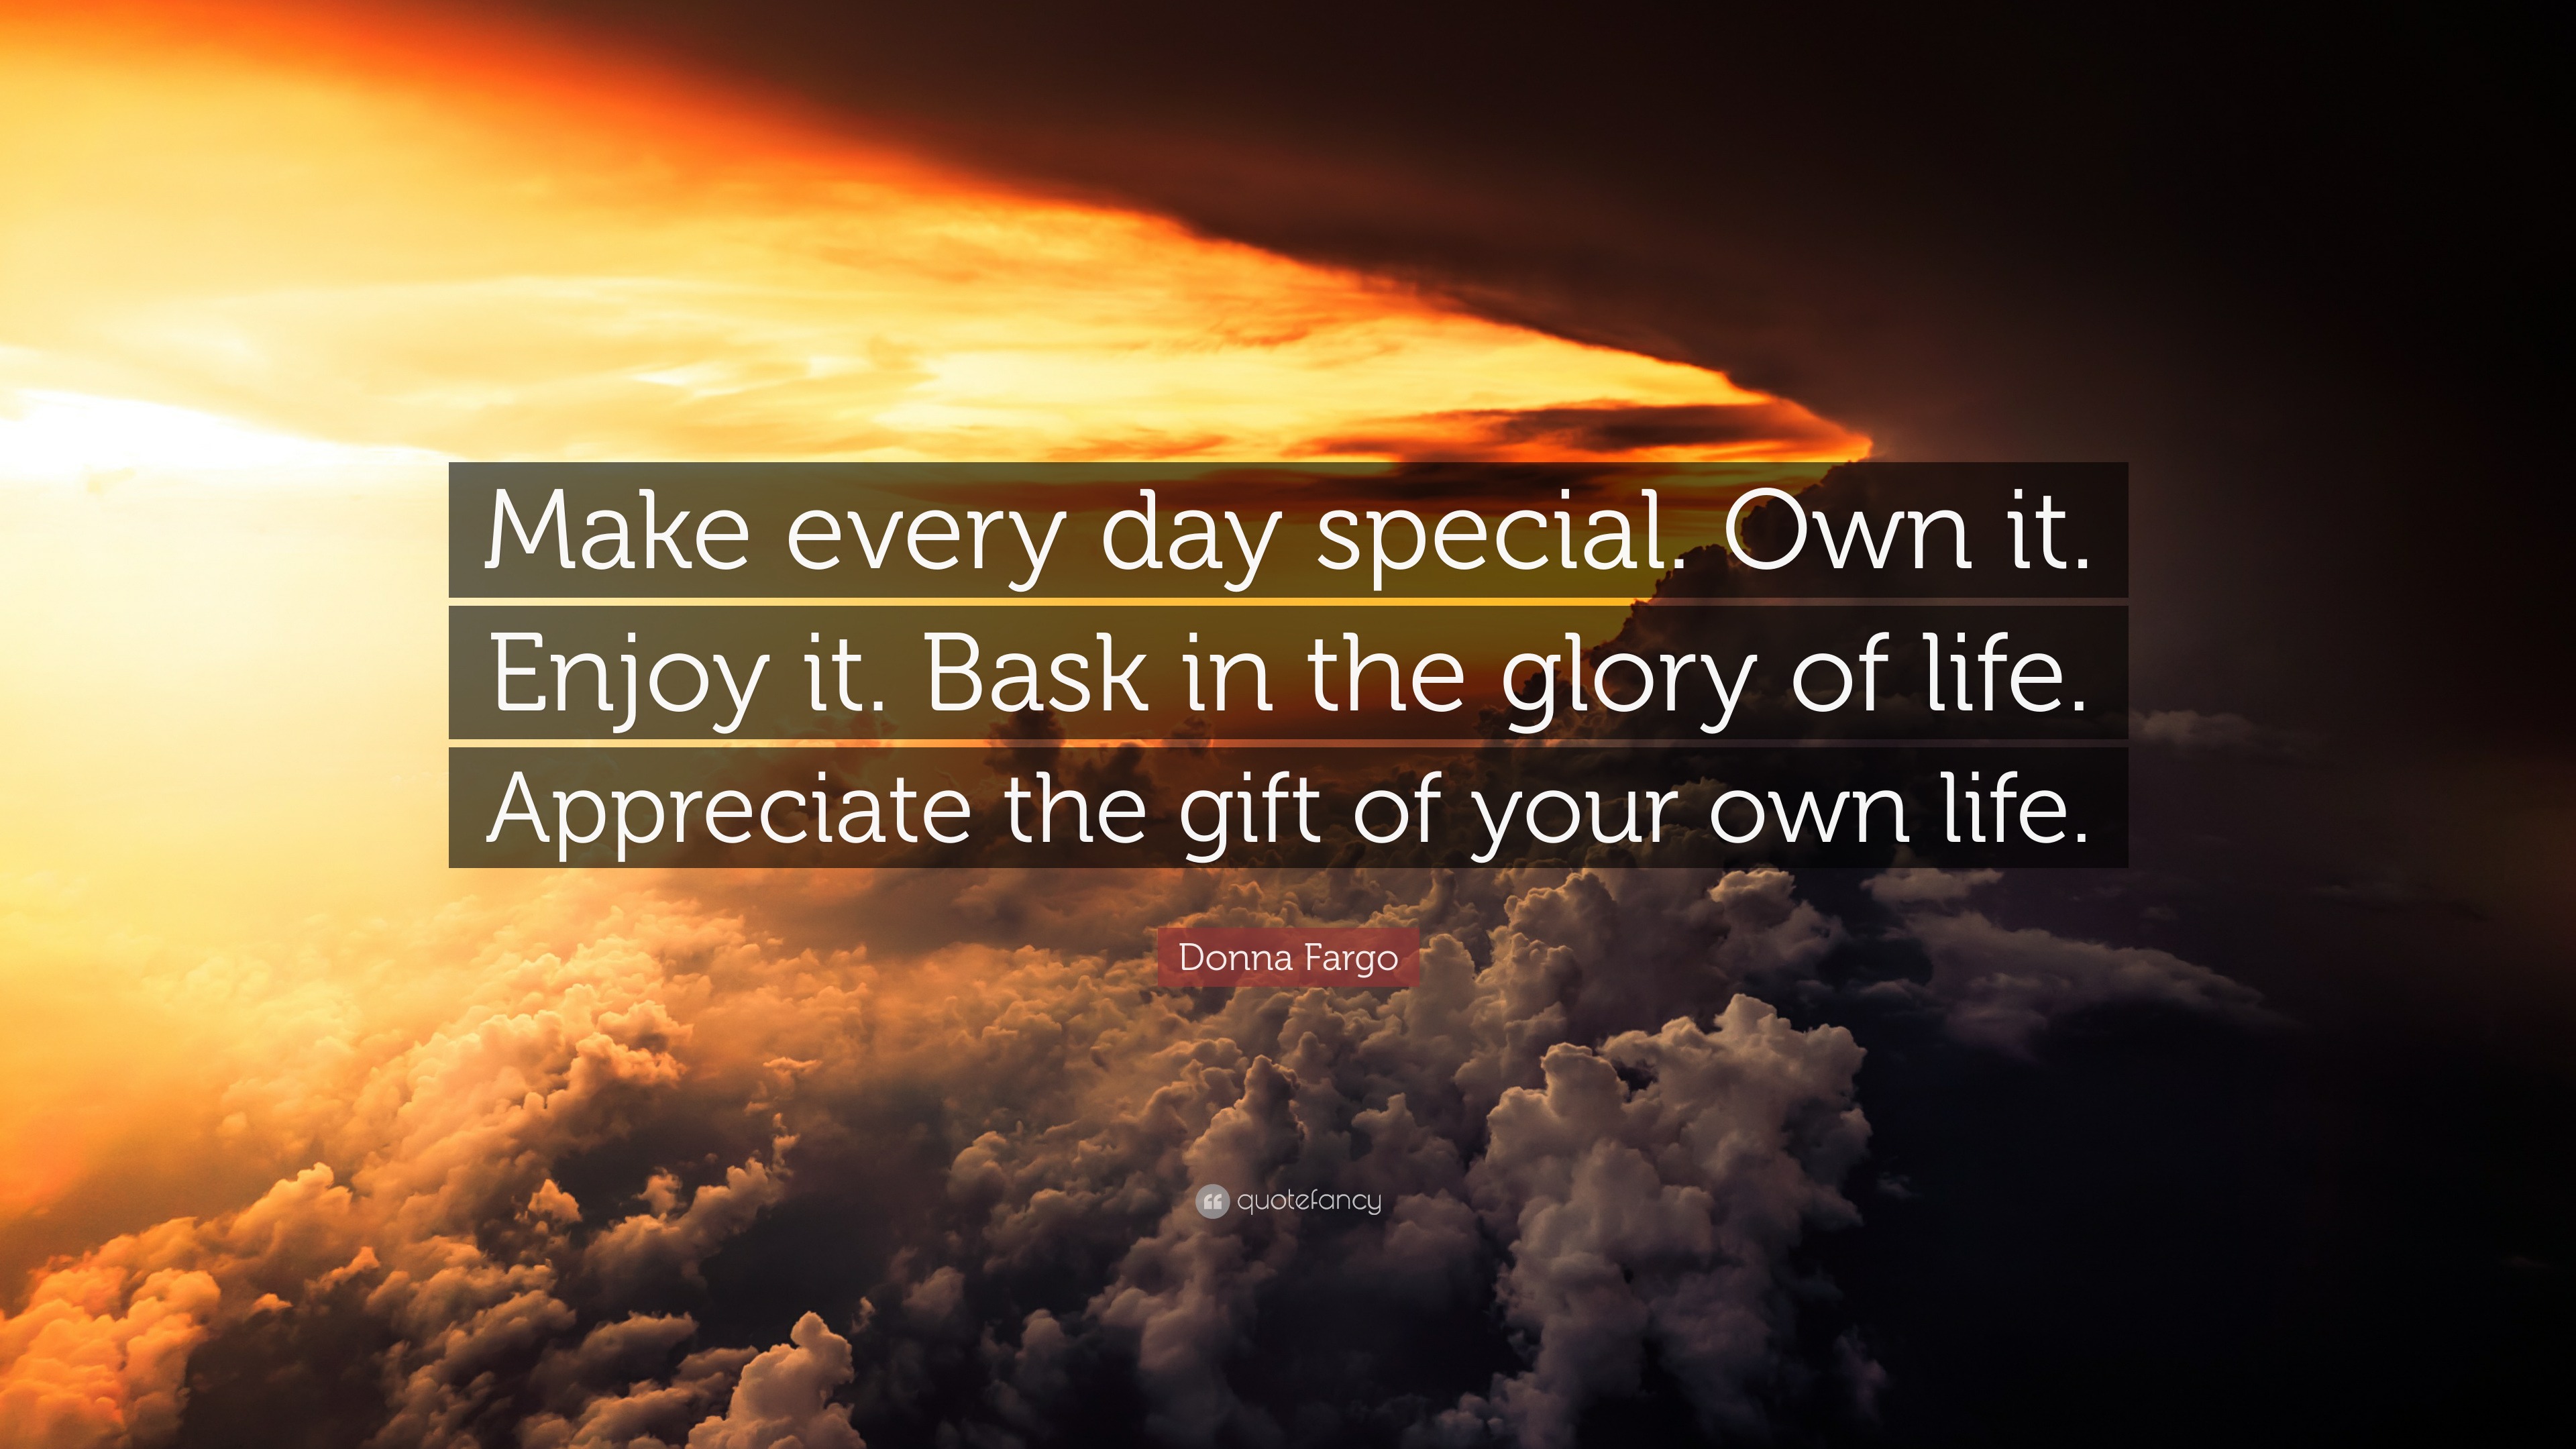 Donna Fargo Quote “Make every day special Own it Enjoy it